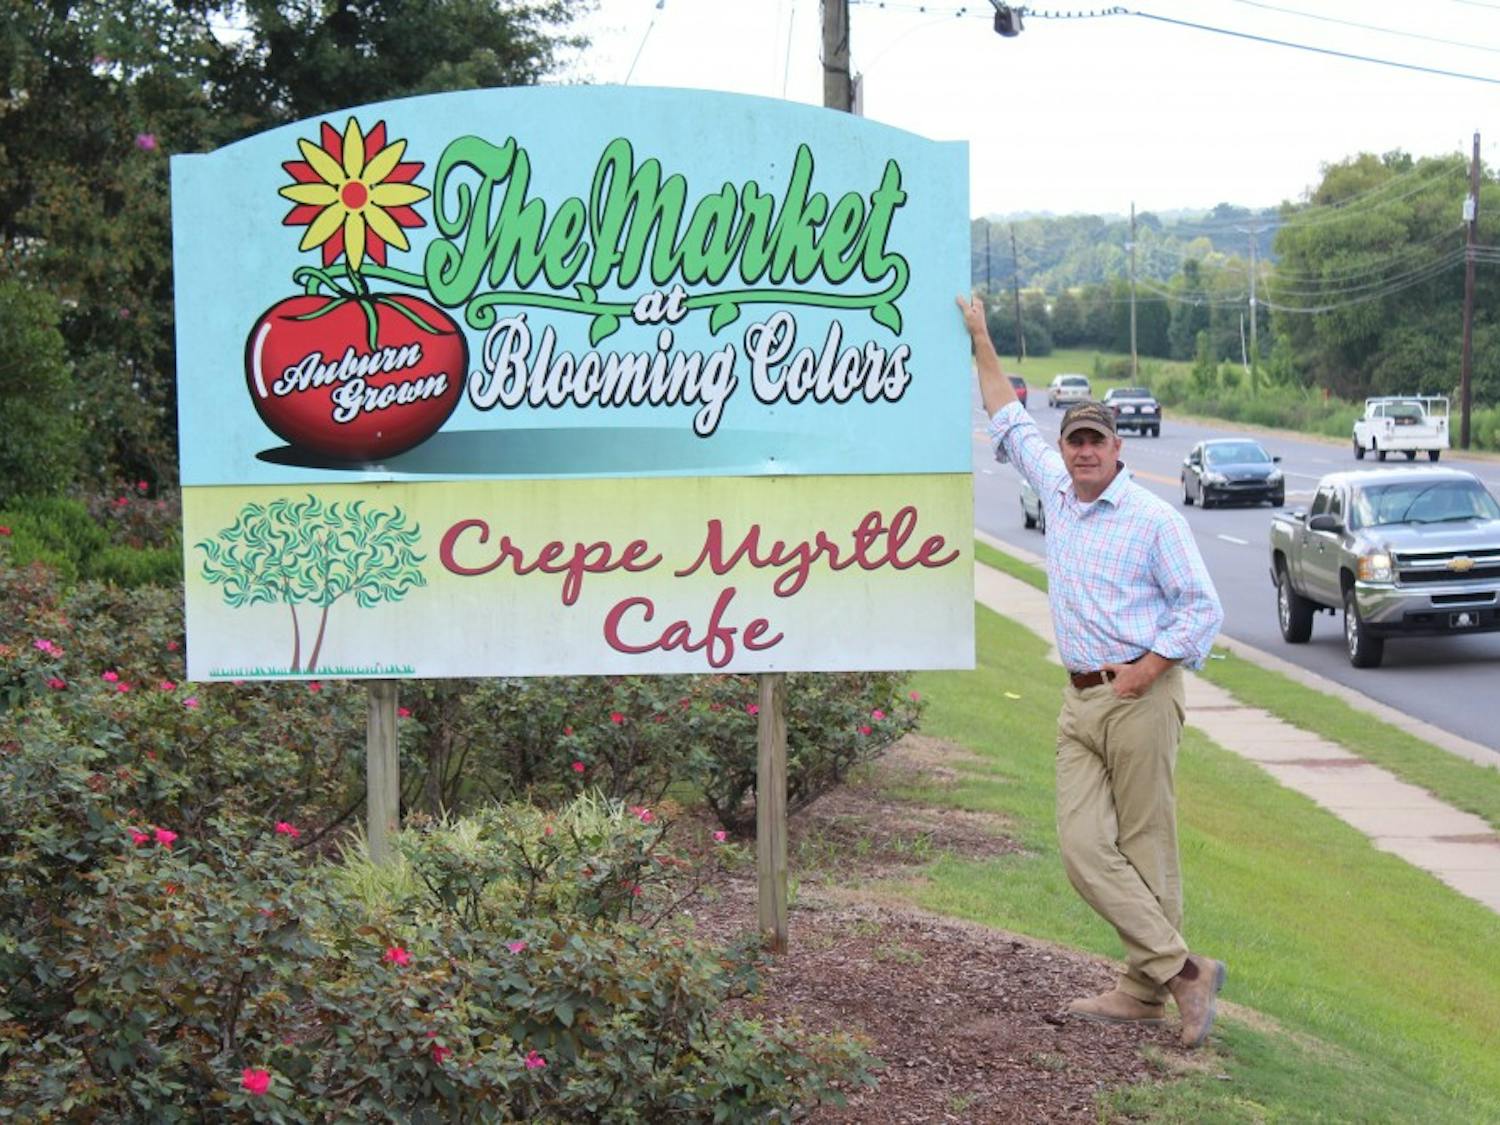 King Braswell, owner of the Crepe Myrtle Café, stands next to the sign for the restaurant, located at the corner of South College Street and South Donahue Drive, on Wednesday, Aug. 23, 2017, in Auburn, Ala.